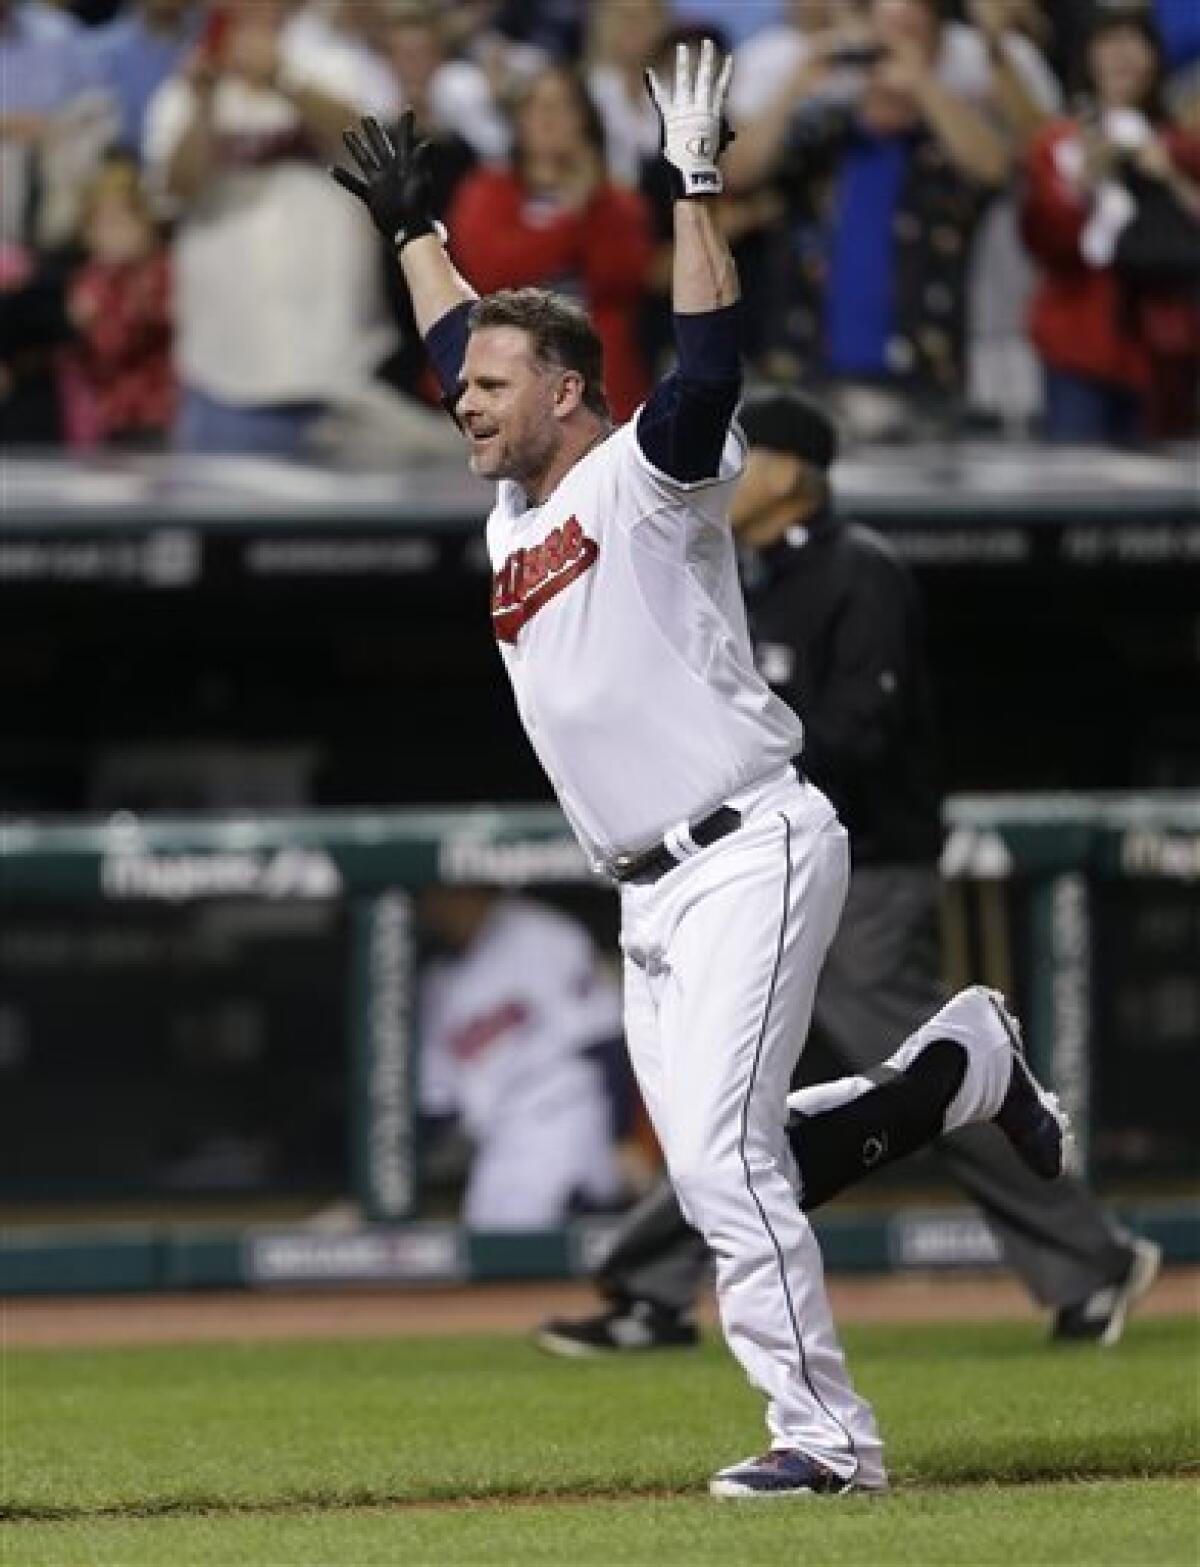 Giambi's pinch-hit homer gives Indians 3-2 win - The San Diego Union-Tribune